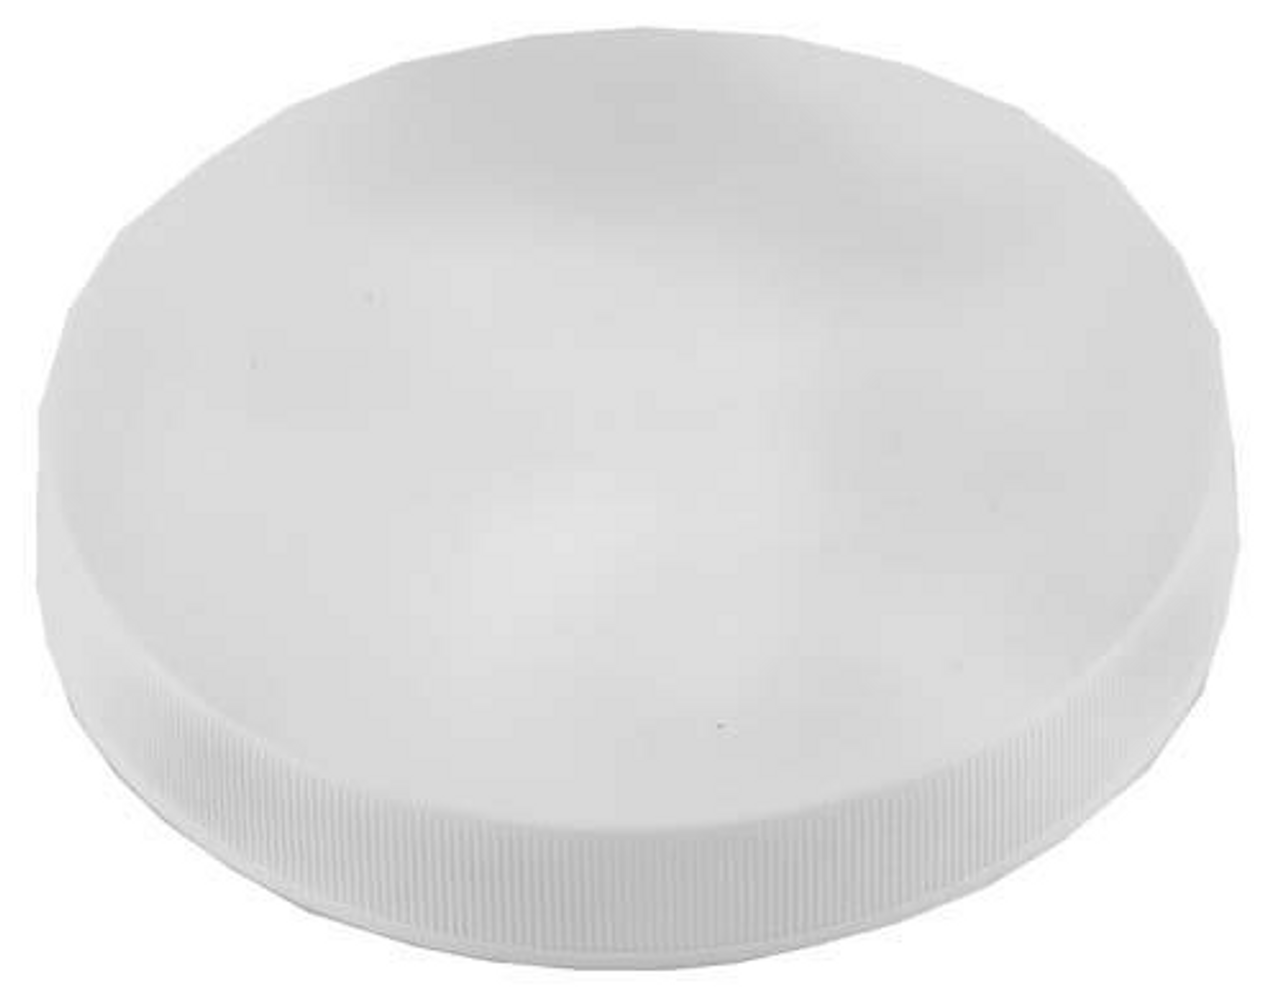 Cap for Sand & Seed Bottle (Universal Fit), 13910